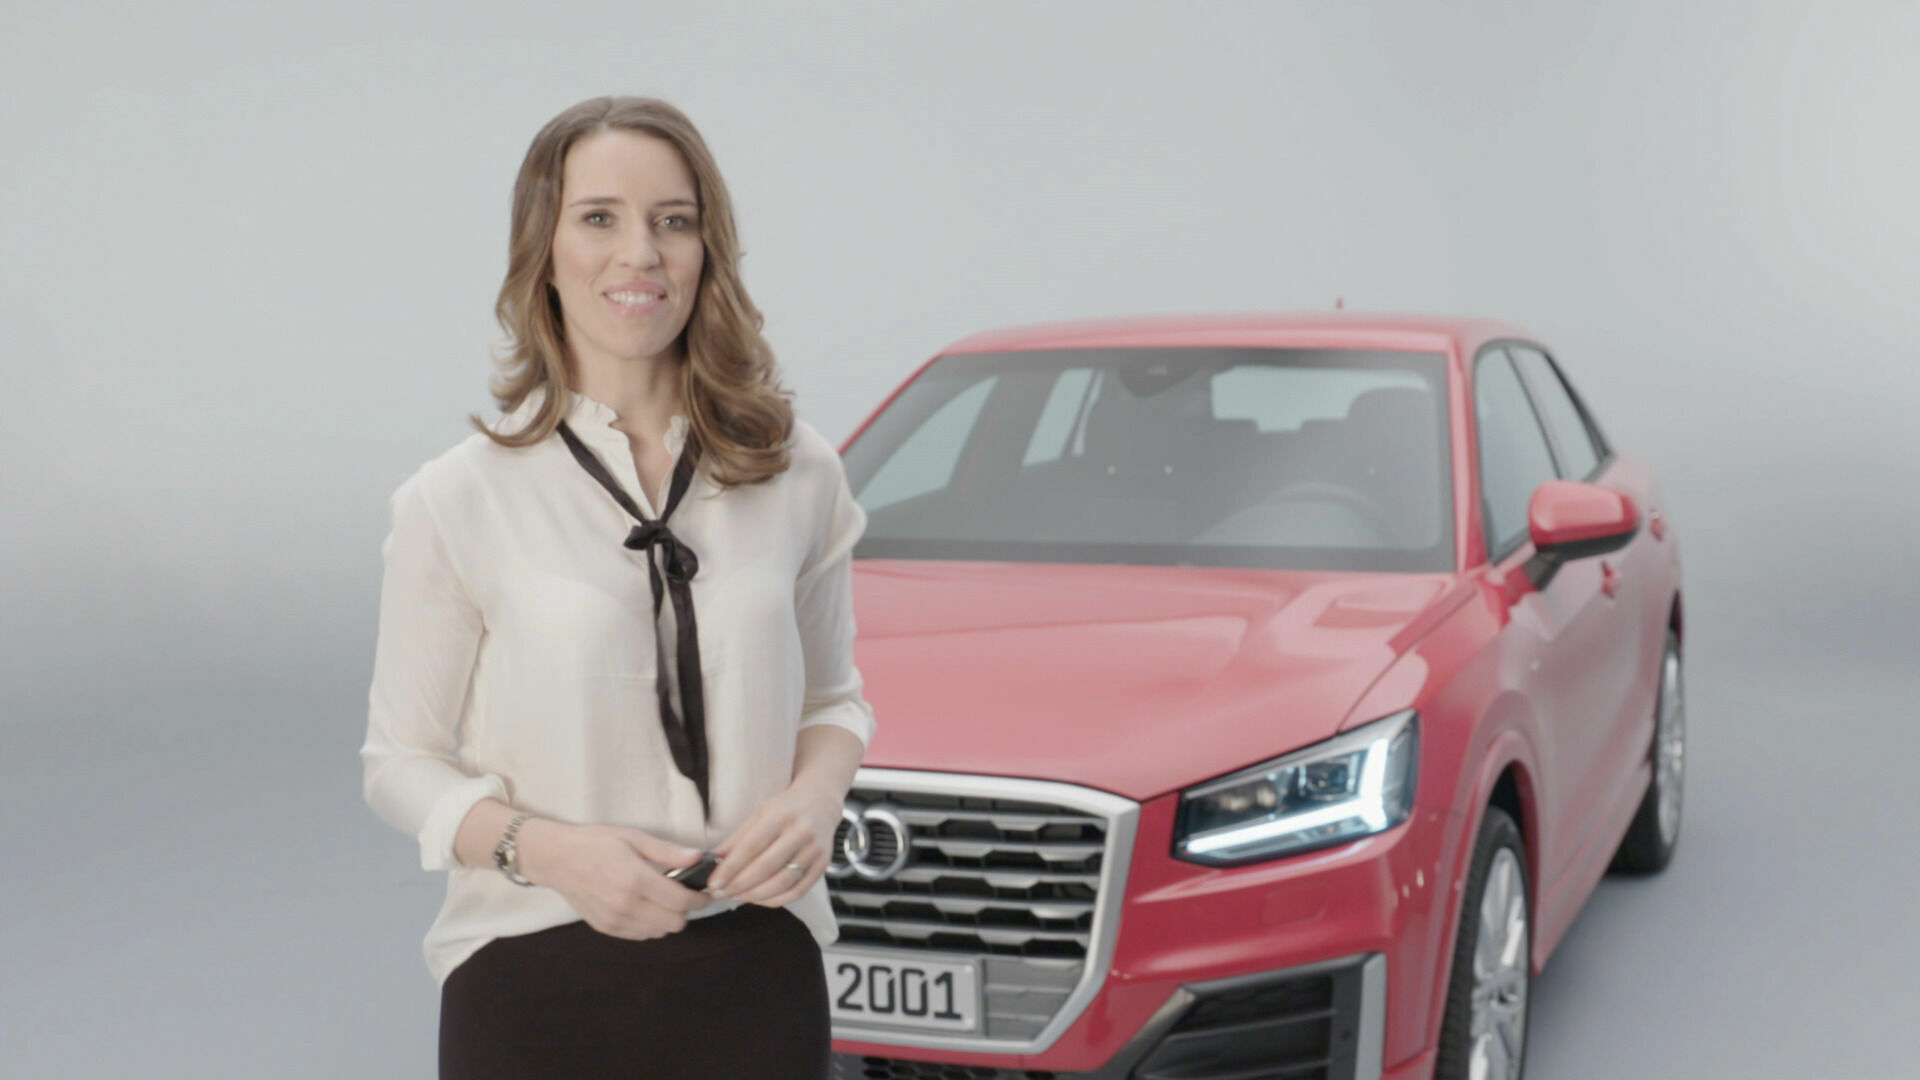 Exclusive presentation of the new Audi Q2